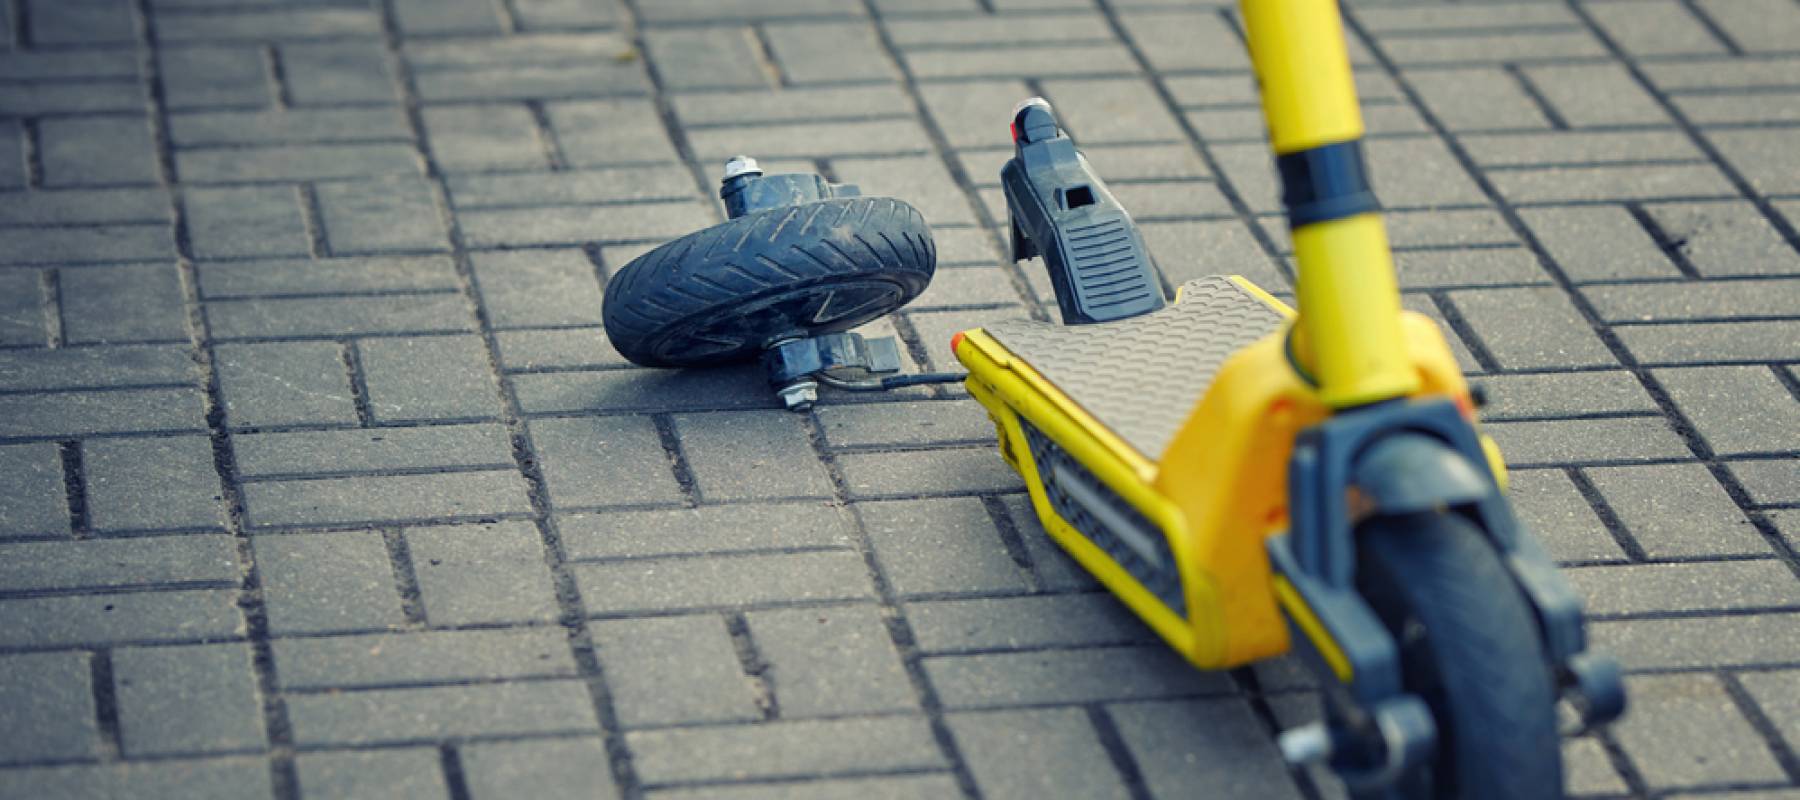 a broken yellow electric scooter on the pavement